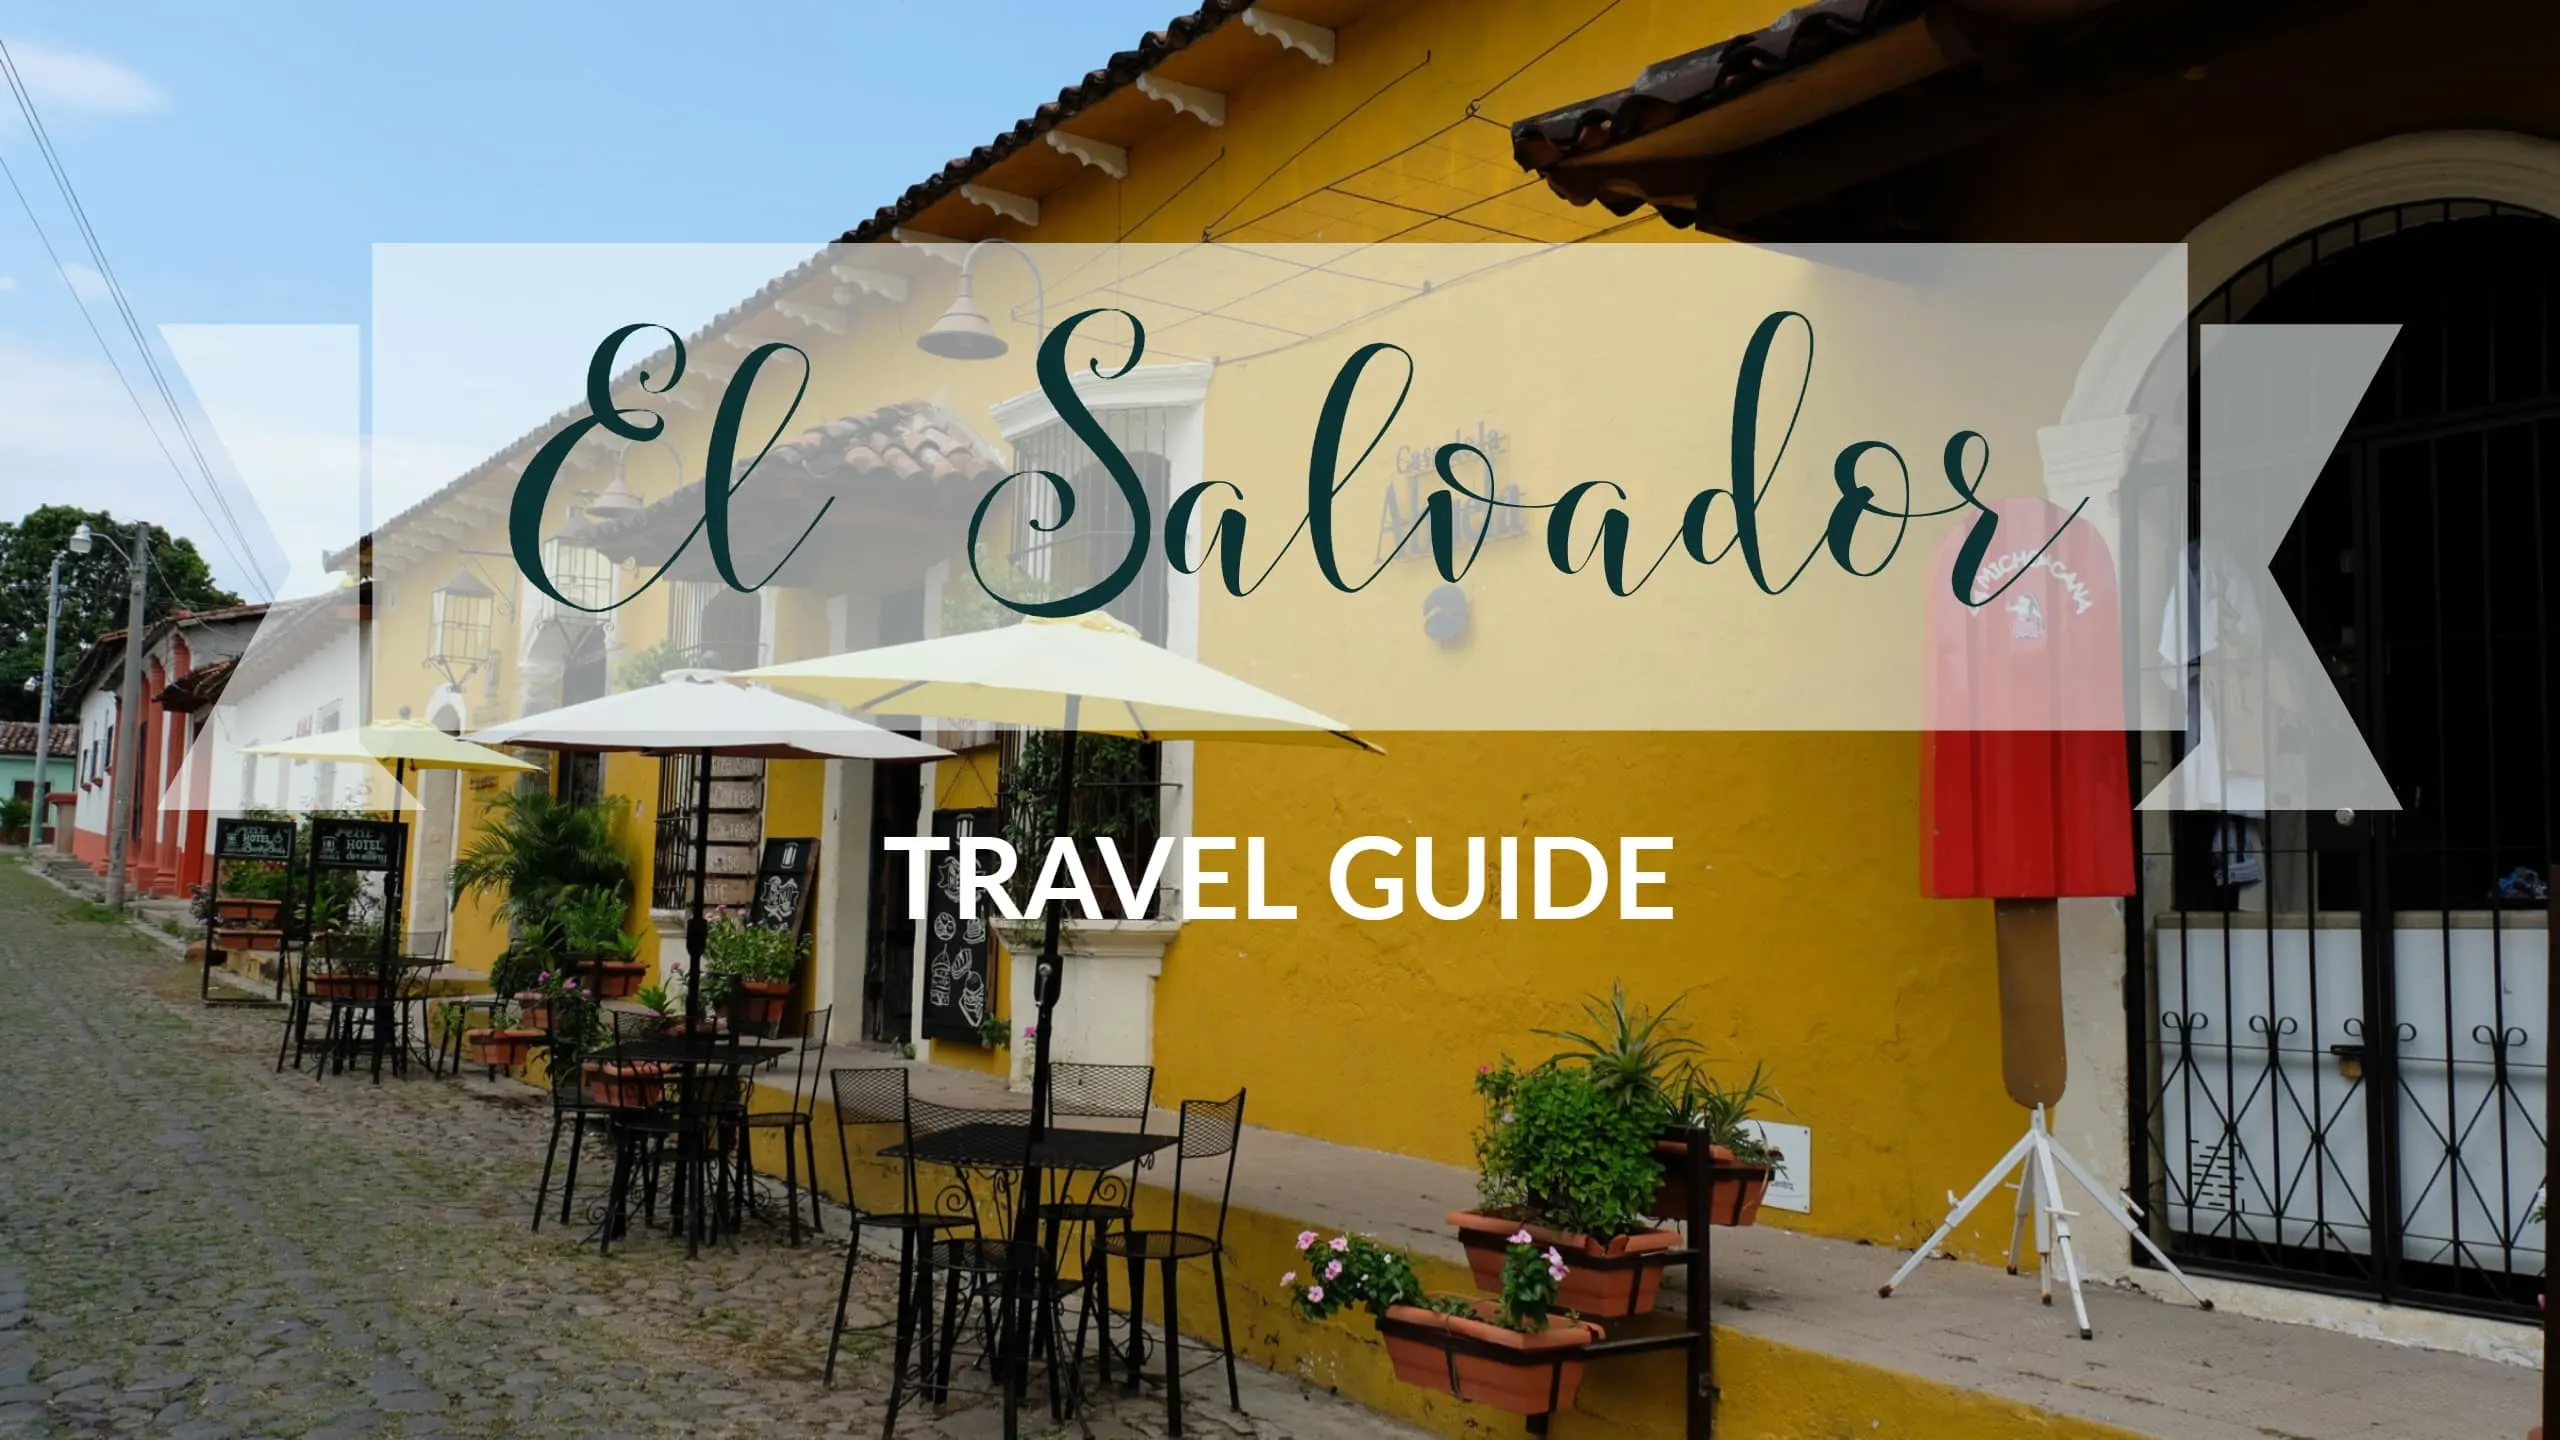 El Salvador Travel Guide - Everything You Need To Know For The Best Holiday